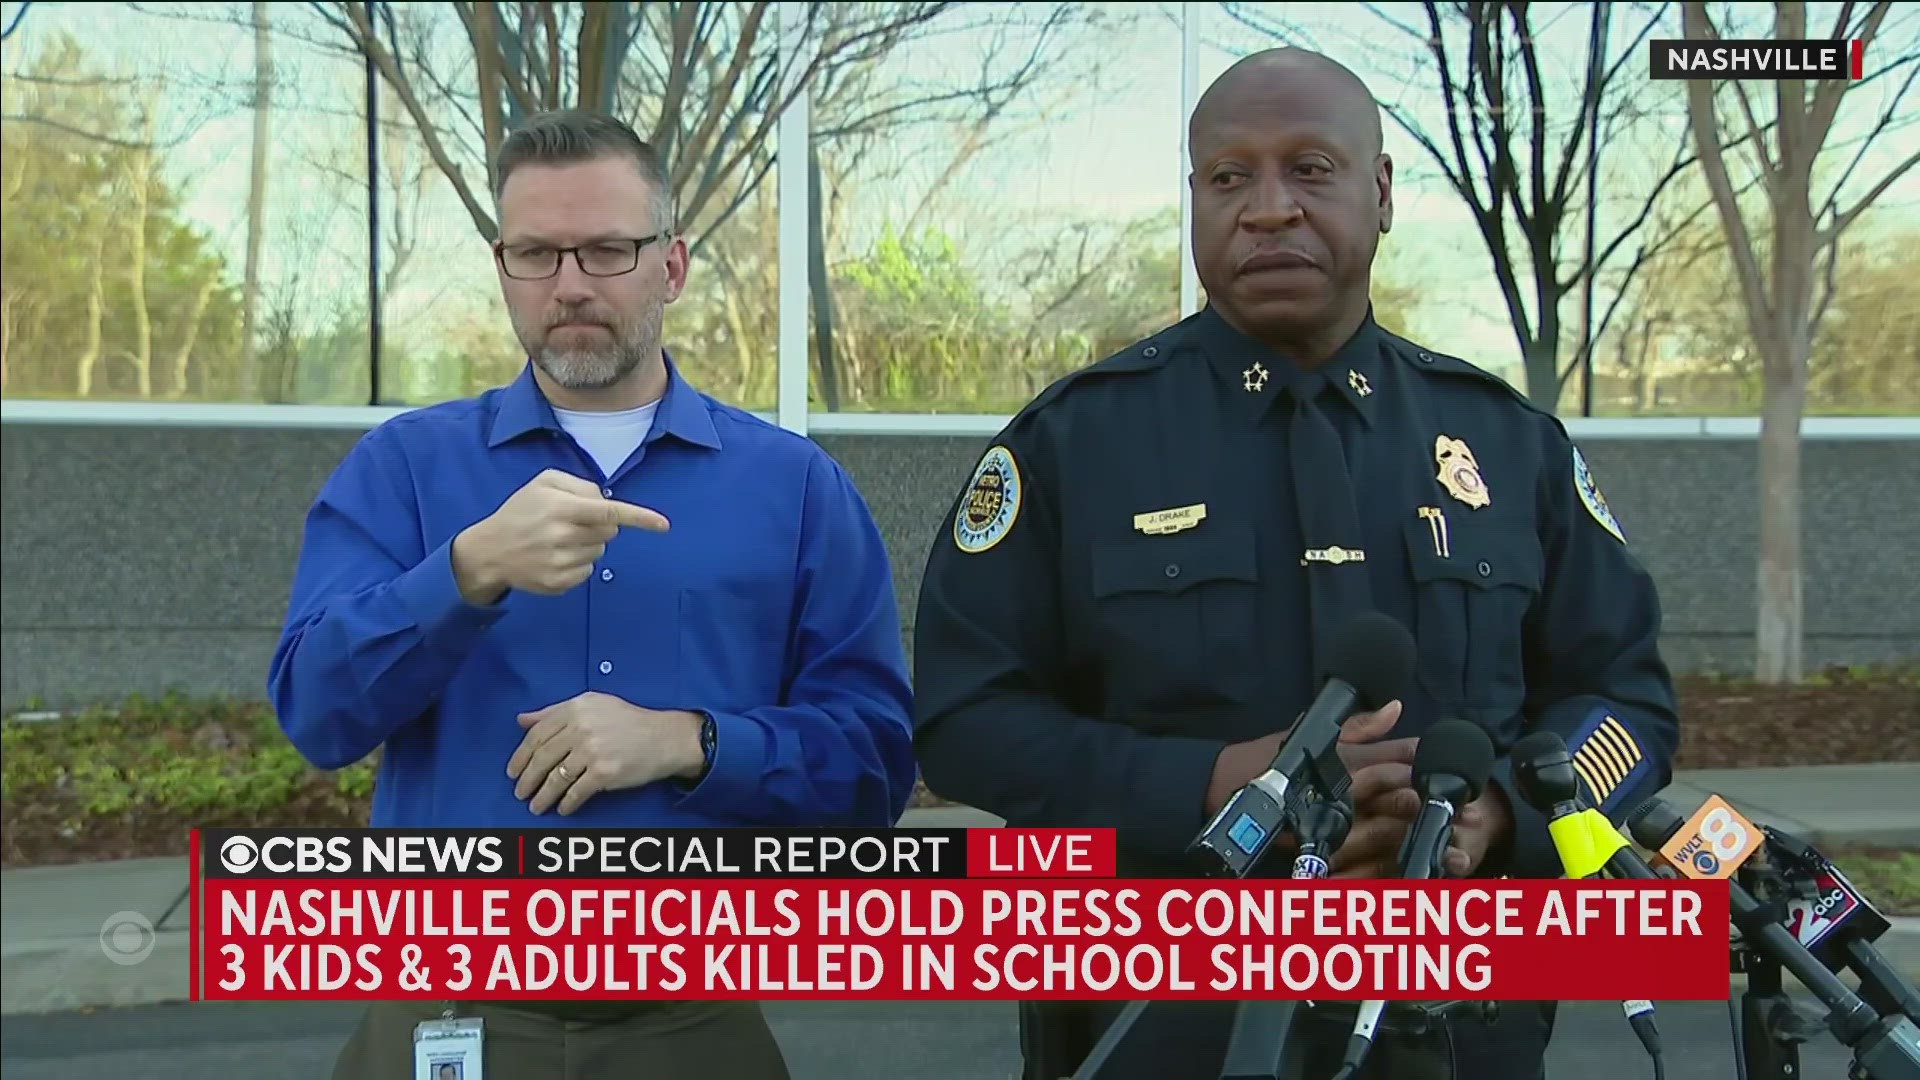 A female shooter wielding two “assault-style” rifles and a pistol killed three students and three adults at a private Christian school in Nashville.